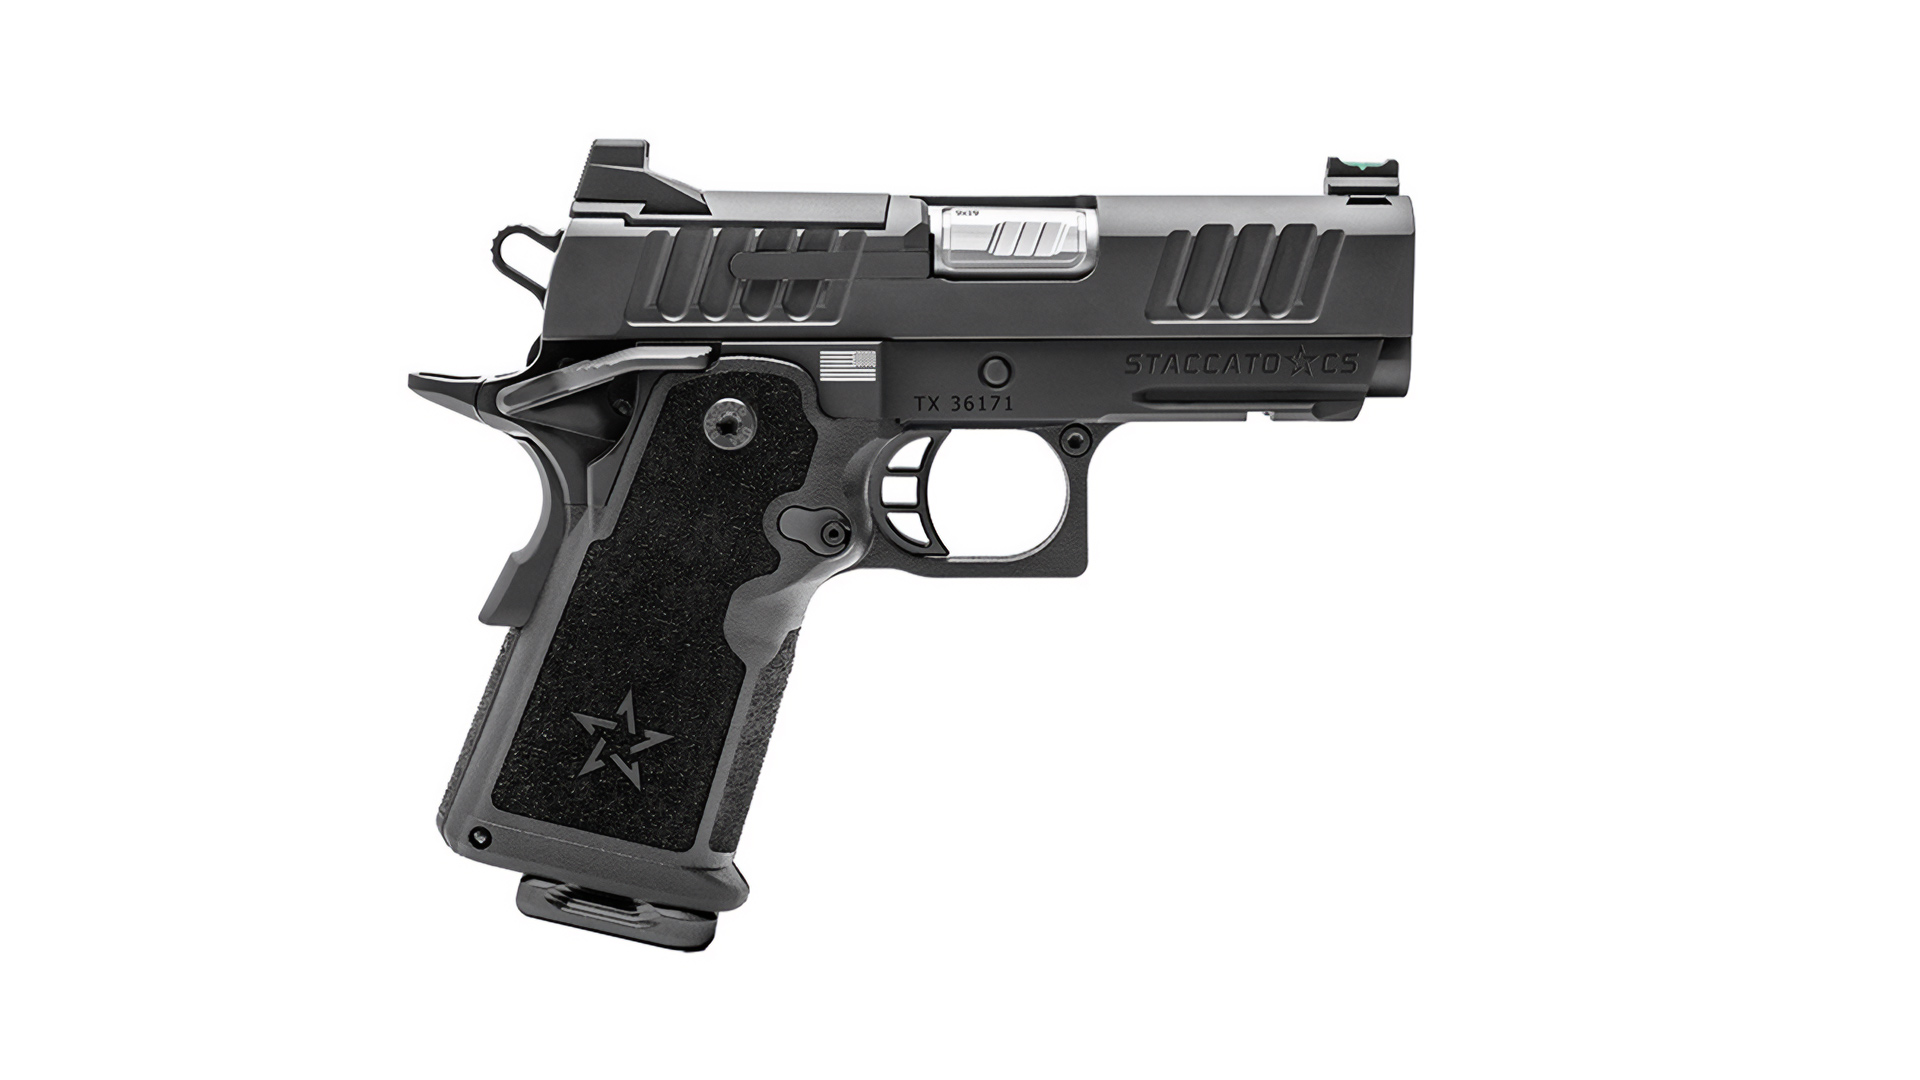  Staccato’s New CS Pistol Makes Debut At Inaugural Celebrating Heroes Festival 